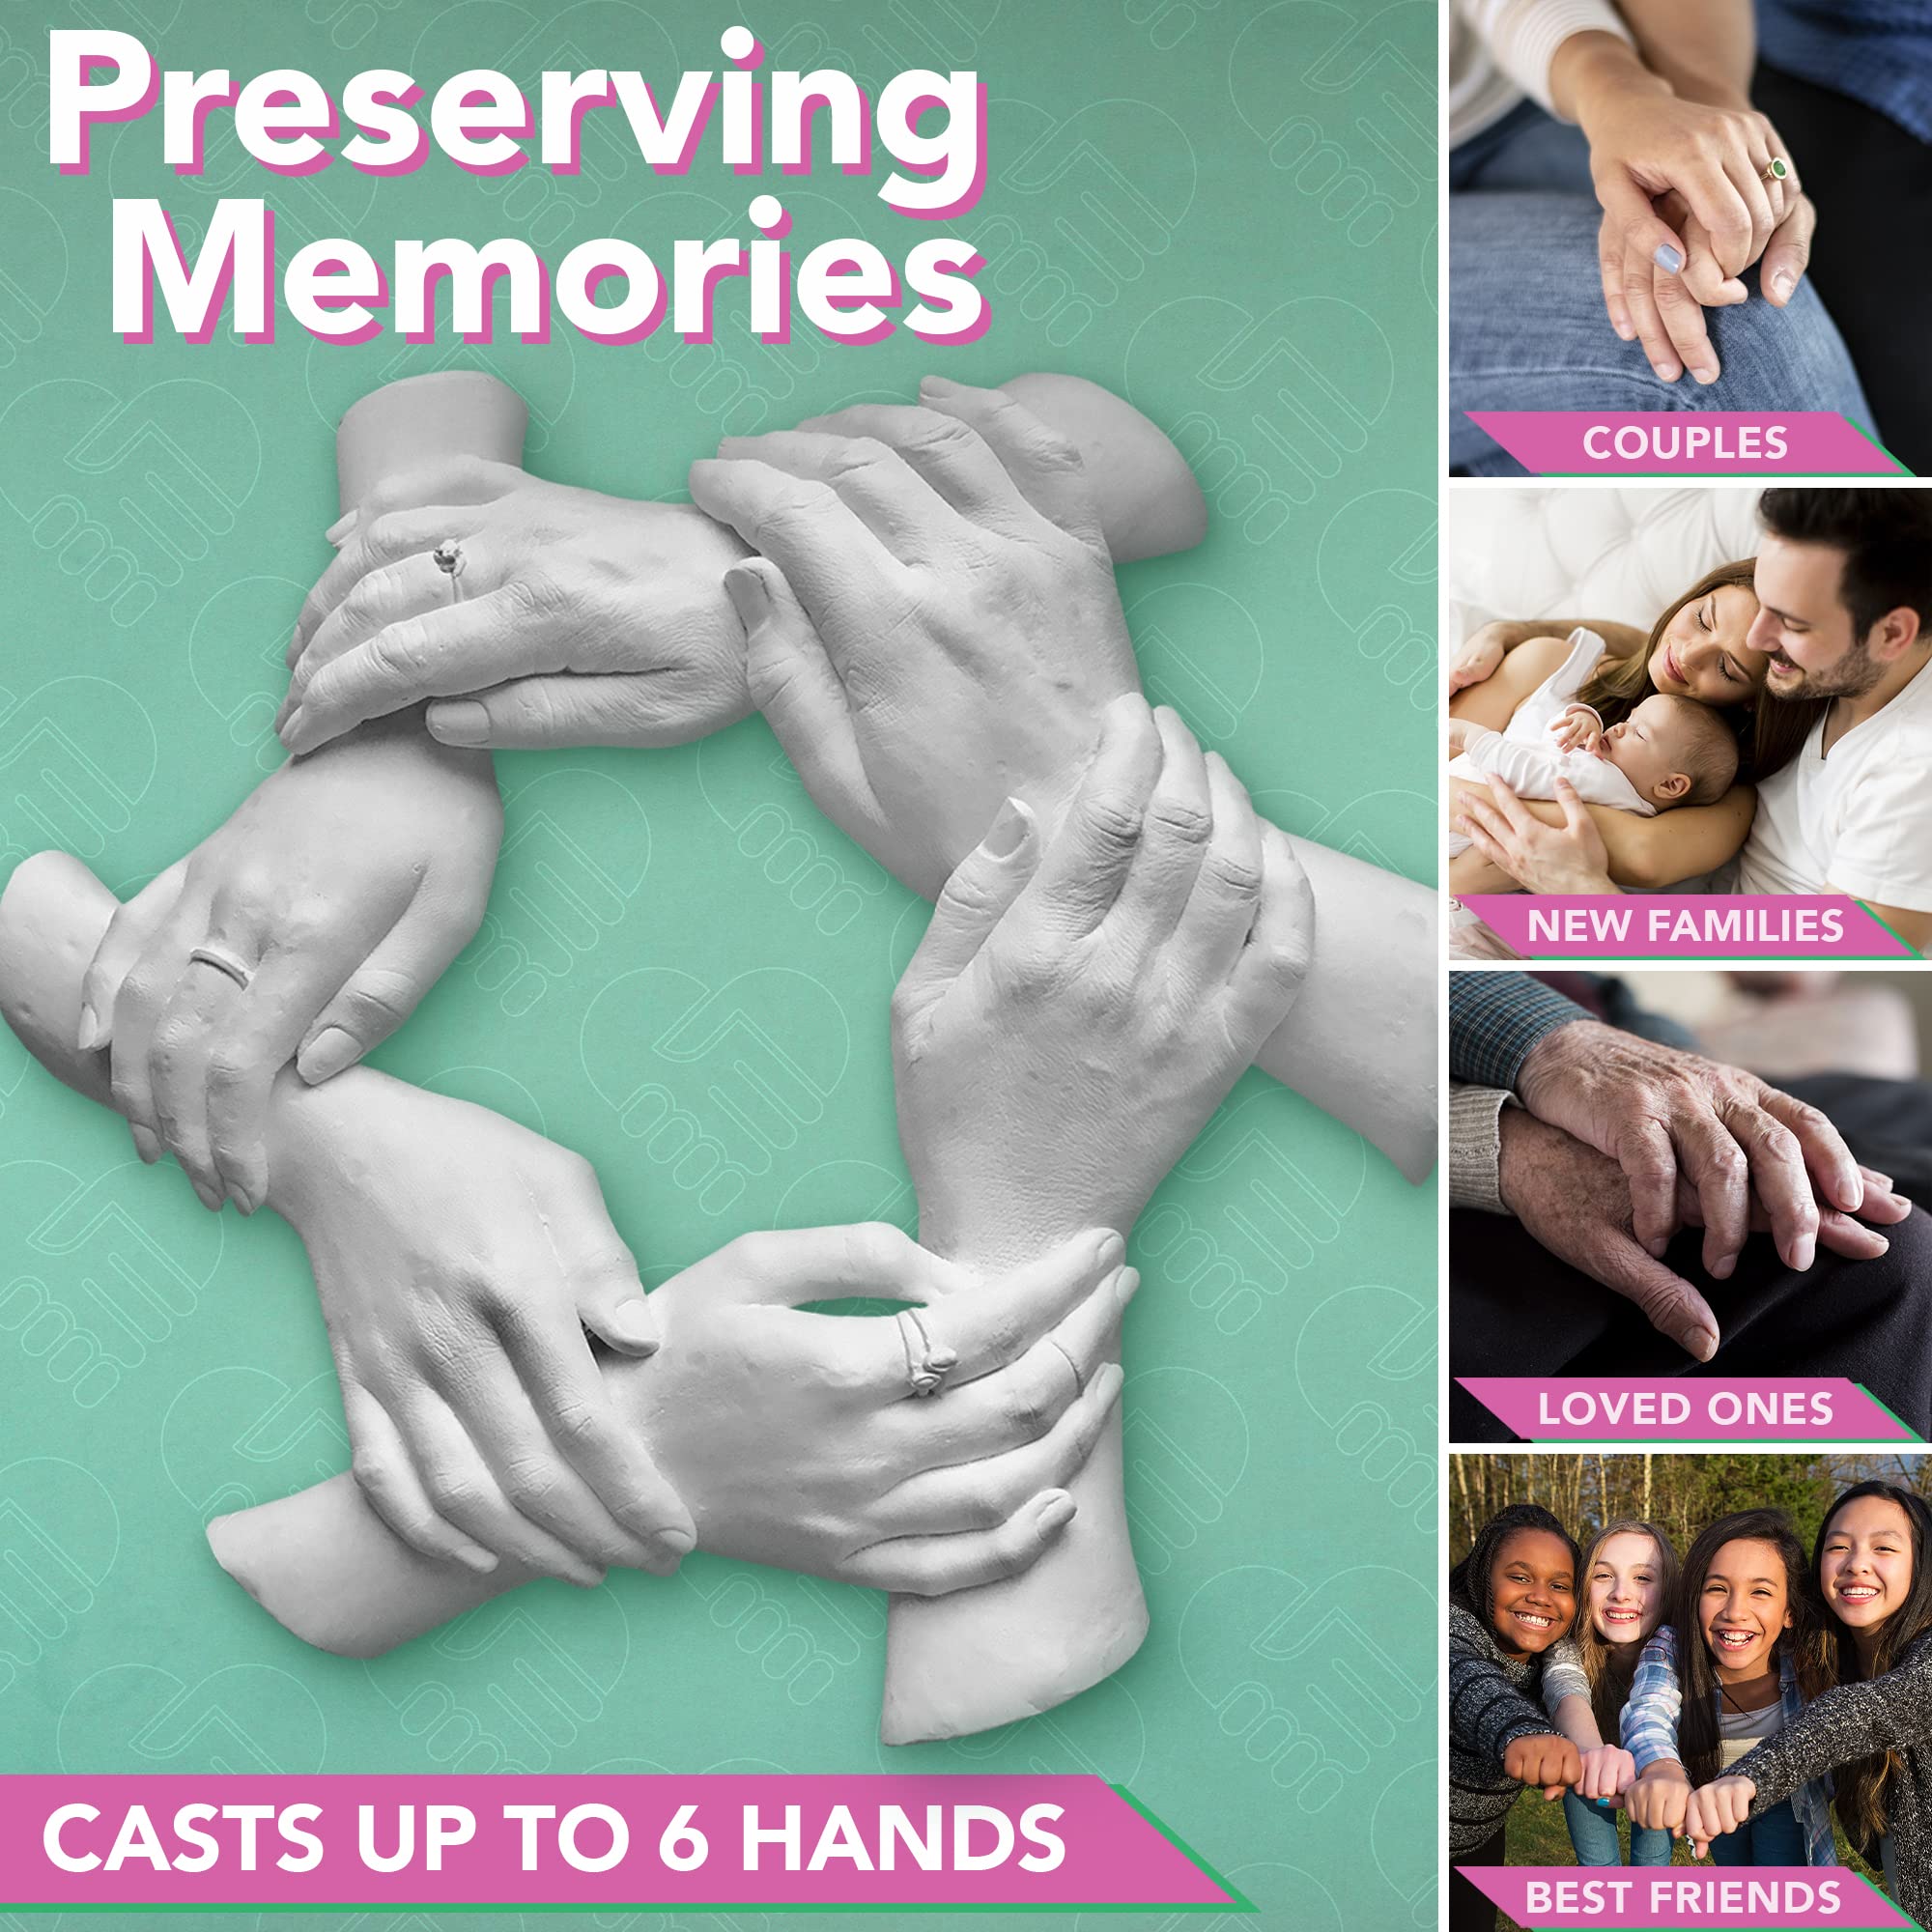 Luna Bean Keepsake Hands Casting Kit - Family Hand Mold, Clasped Group Hand  Sculpture Kit & Molding Kit - Crafts For Adults & Kids Diy (cast Up To 6